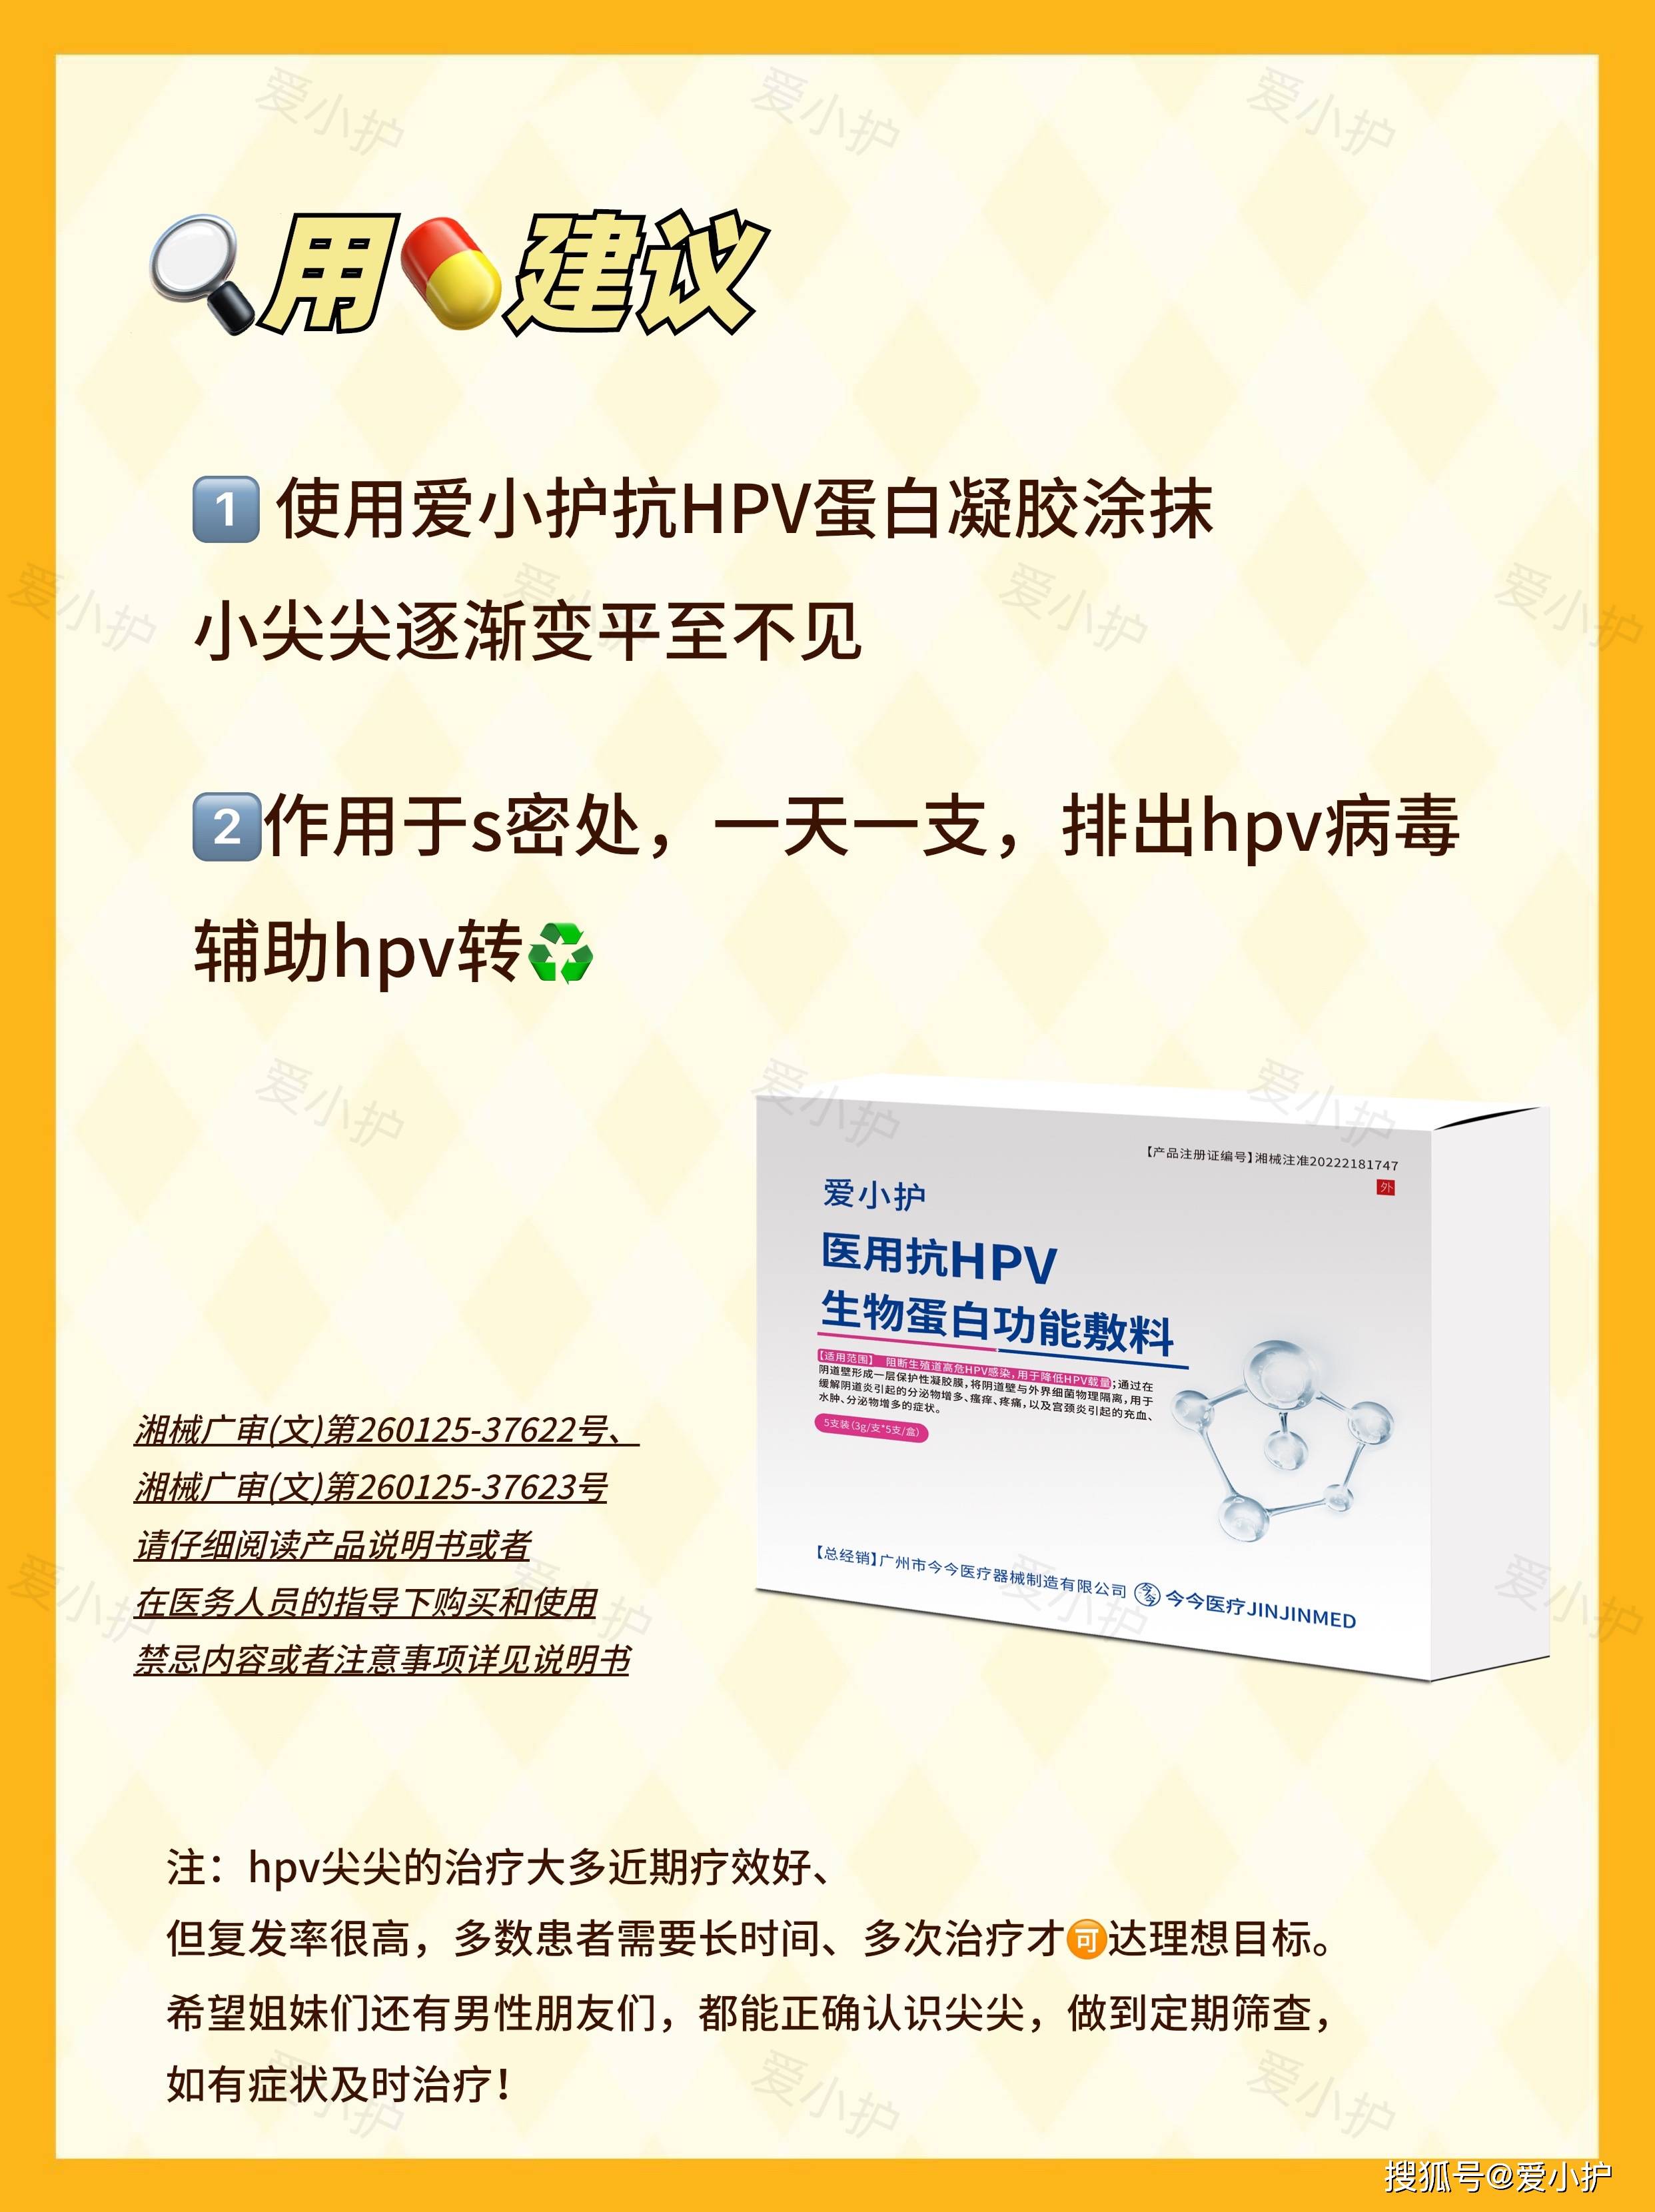 tct和hpv报告单图图片